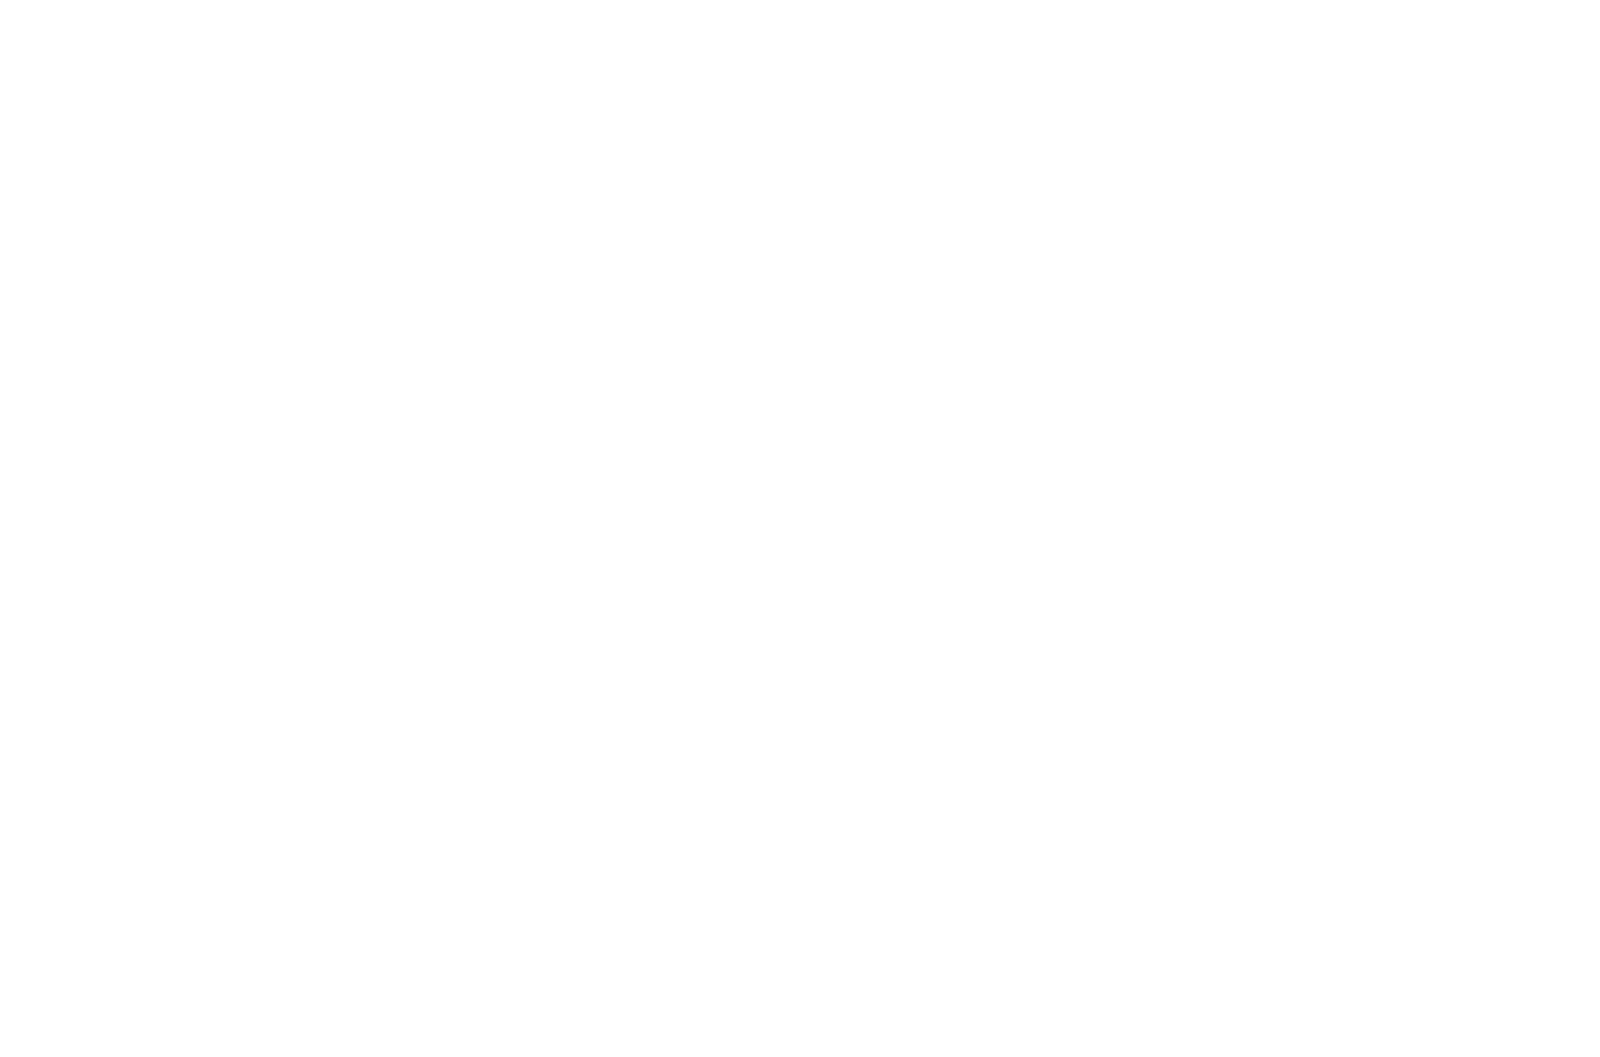 NanoImaging Services logo, "NIS" in large font with "NanoImaging Services" in smaller text, and 5 hexagons in the upper left forming an arch.